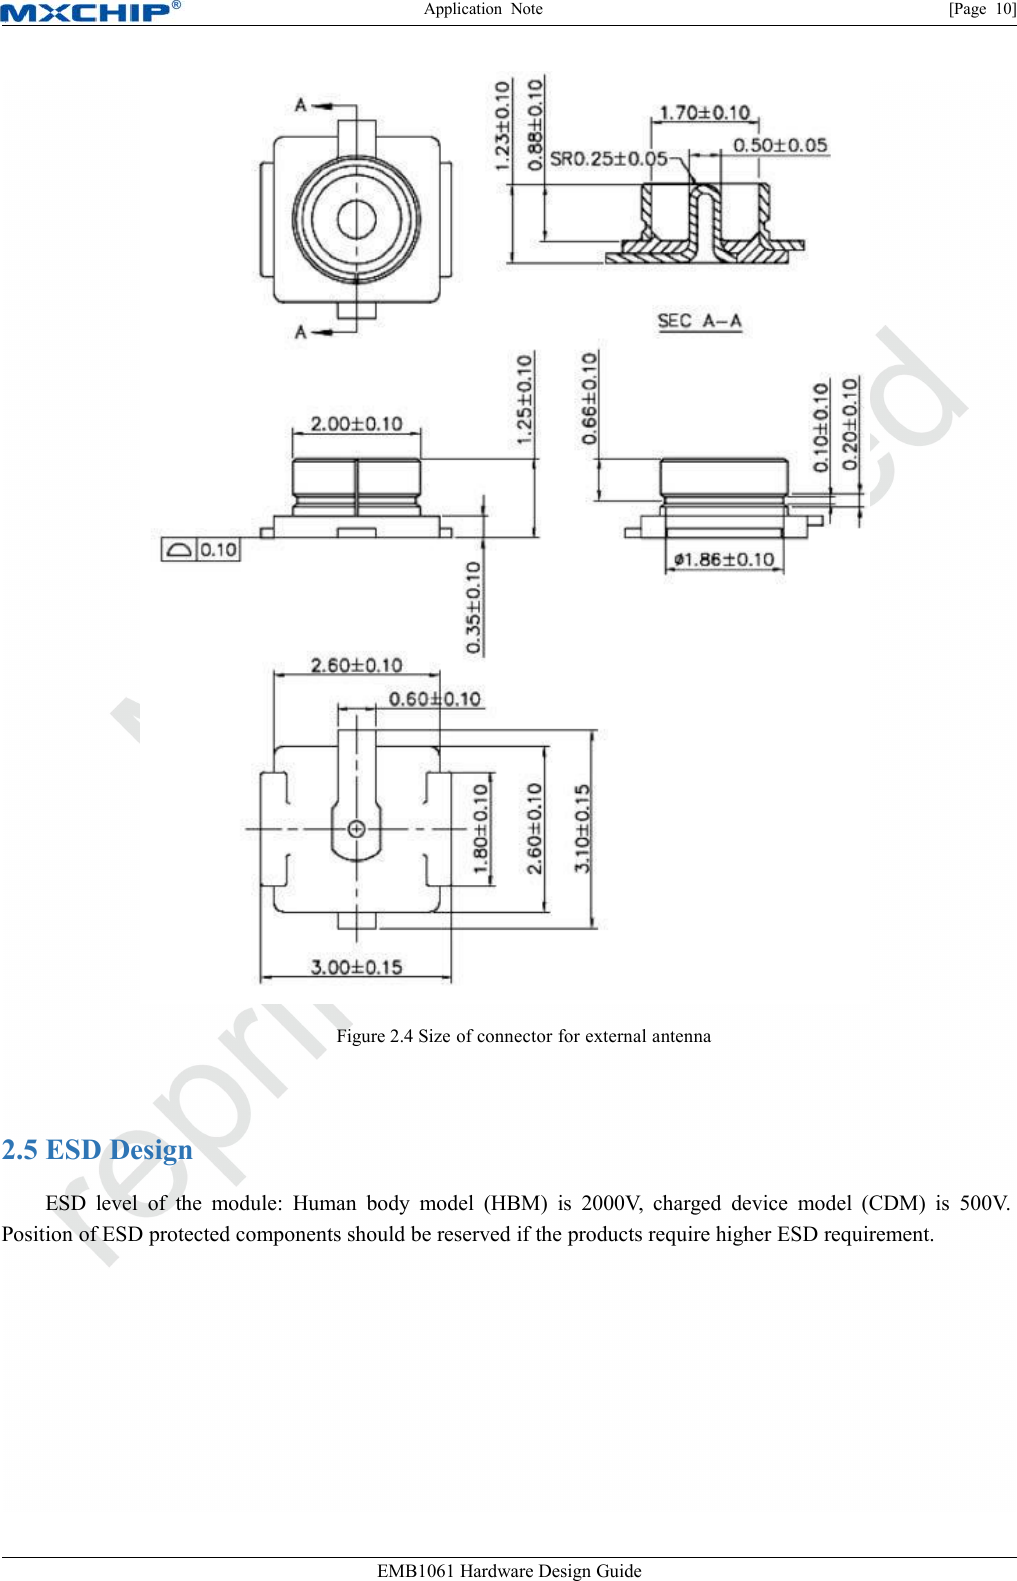 Application Note [Page 10]EMB1061 Hardware Design GuideFigure 2.4 Size of connector for external antenna2.5 ESD DesignESD level of the module: Human body model (HBM) is 2000V, charged device model (CDM) is 500V.Position of ESD protected components should be reserved if the products require higher ESD requirement.